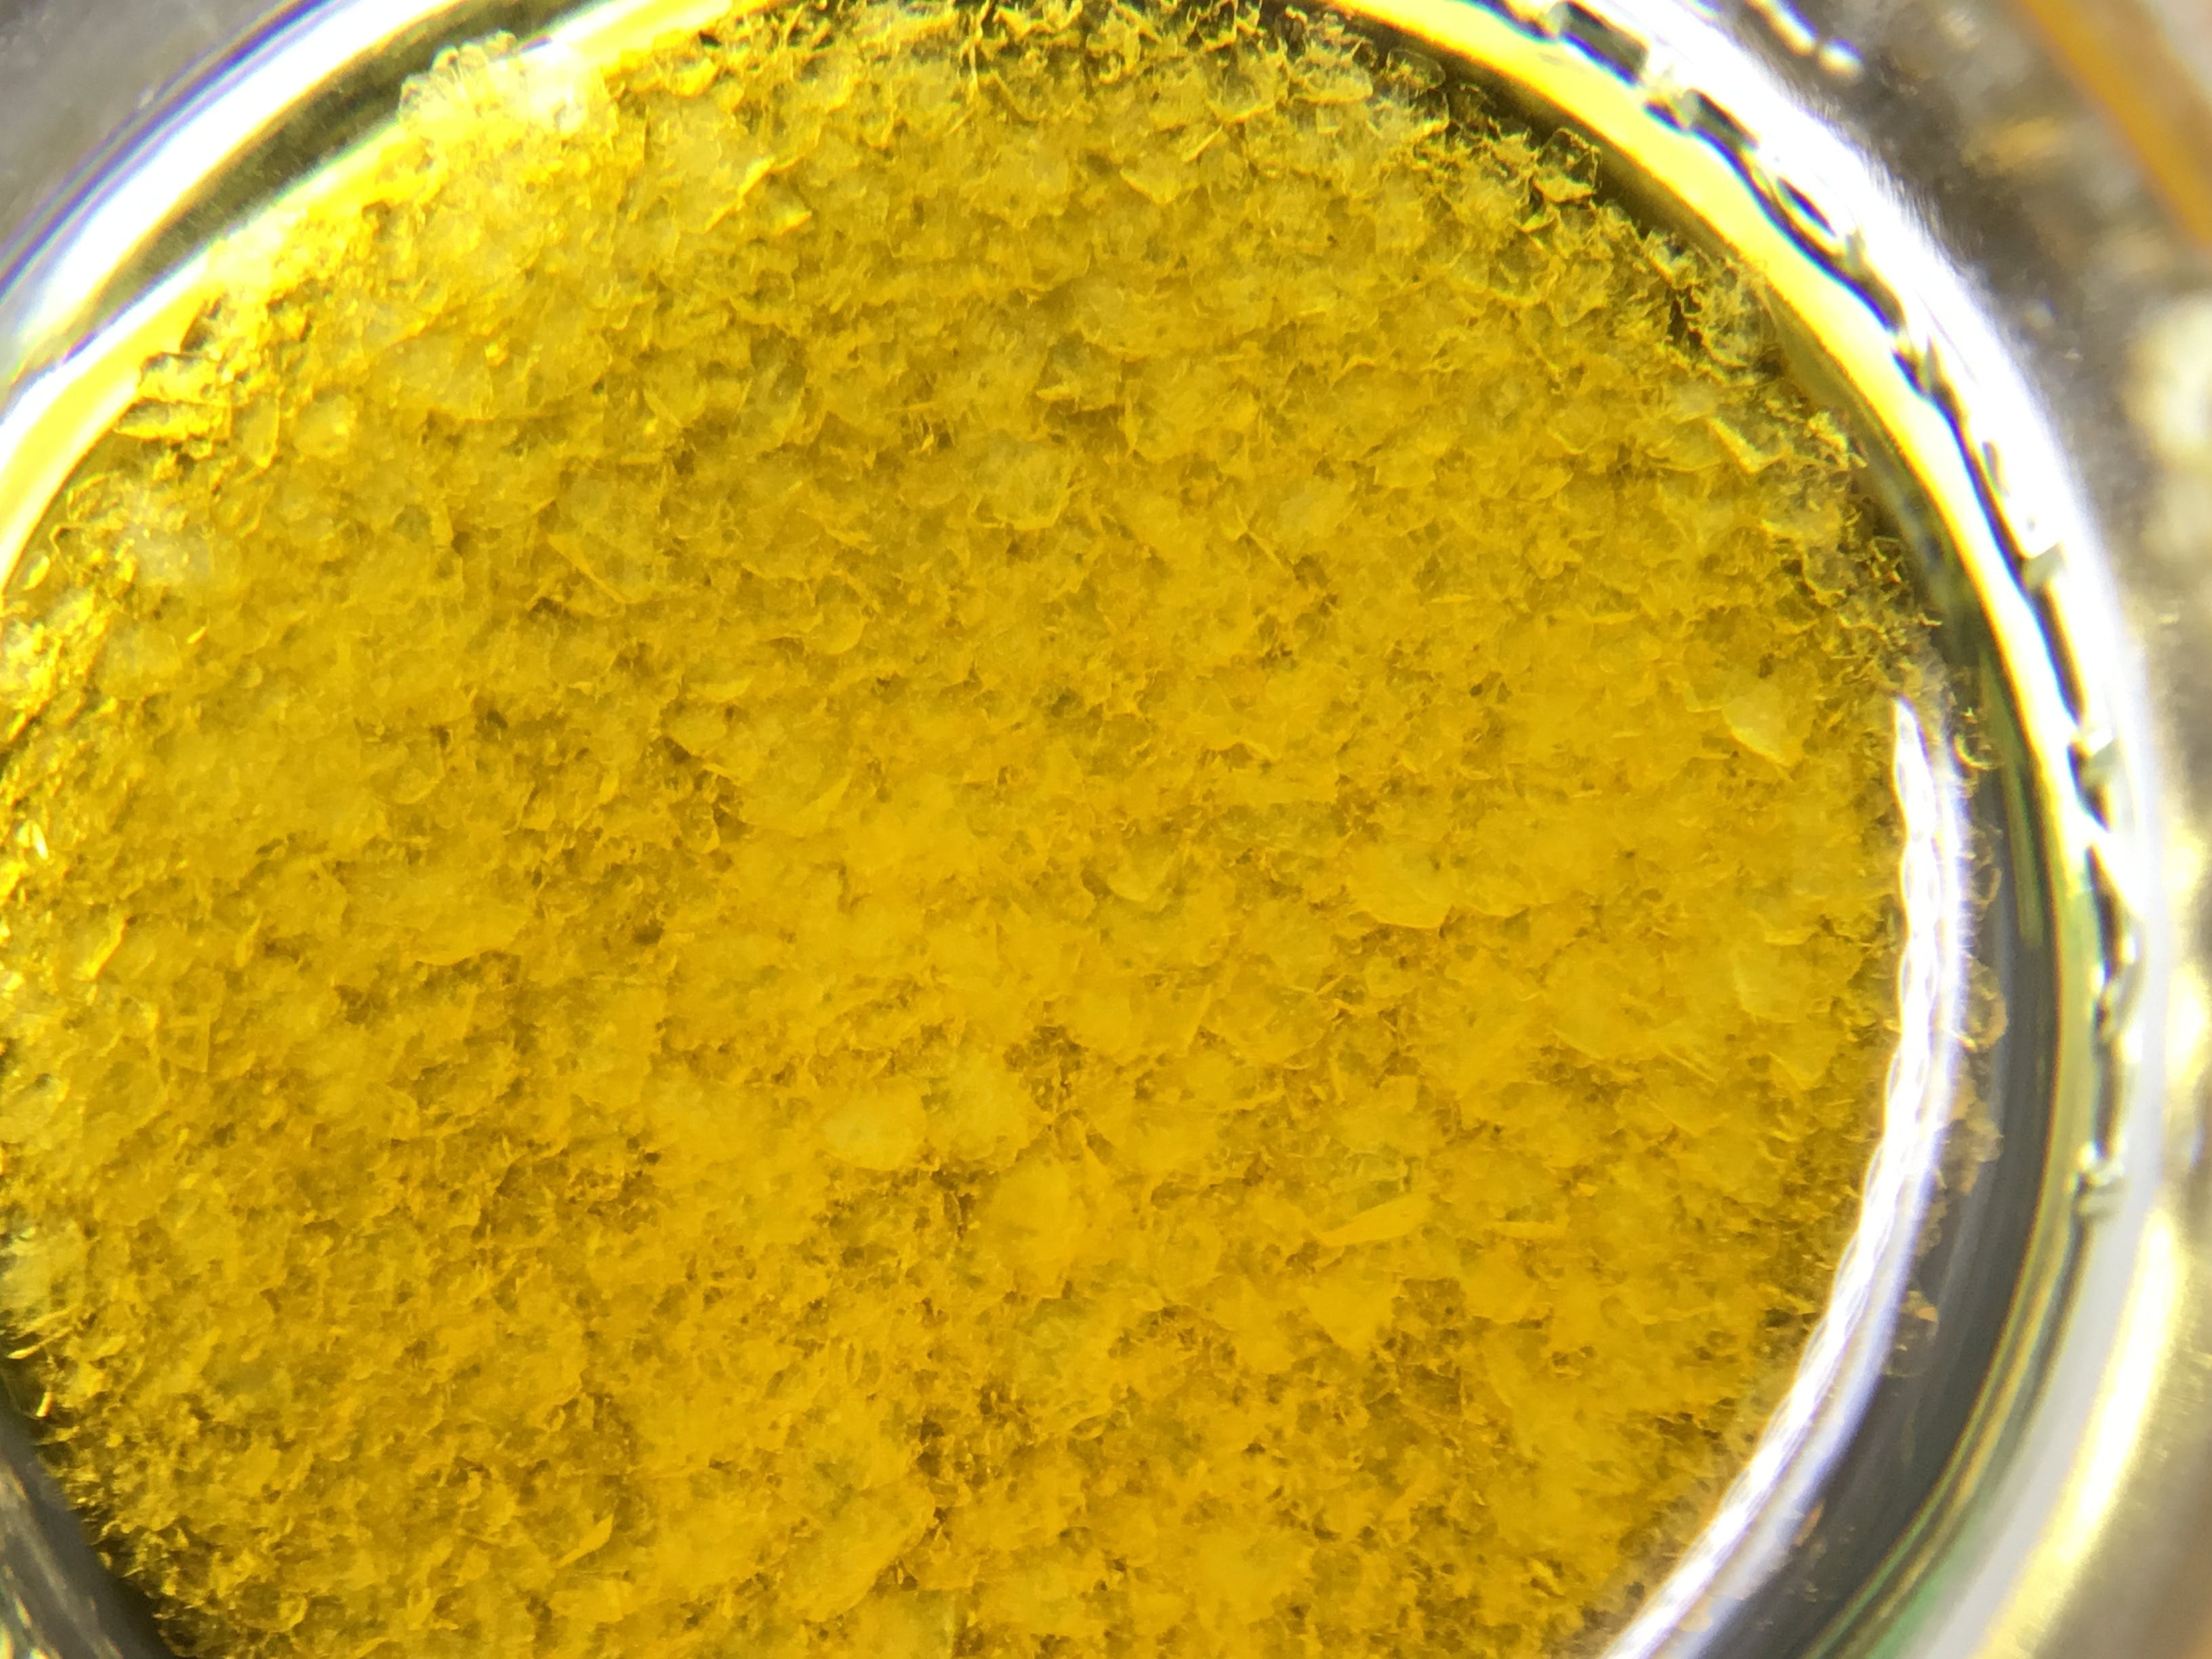 concentrate-arcturus-1g-sauce-sour-berry